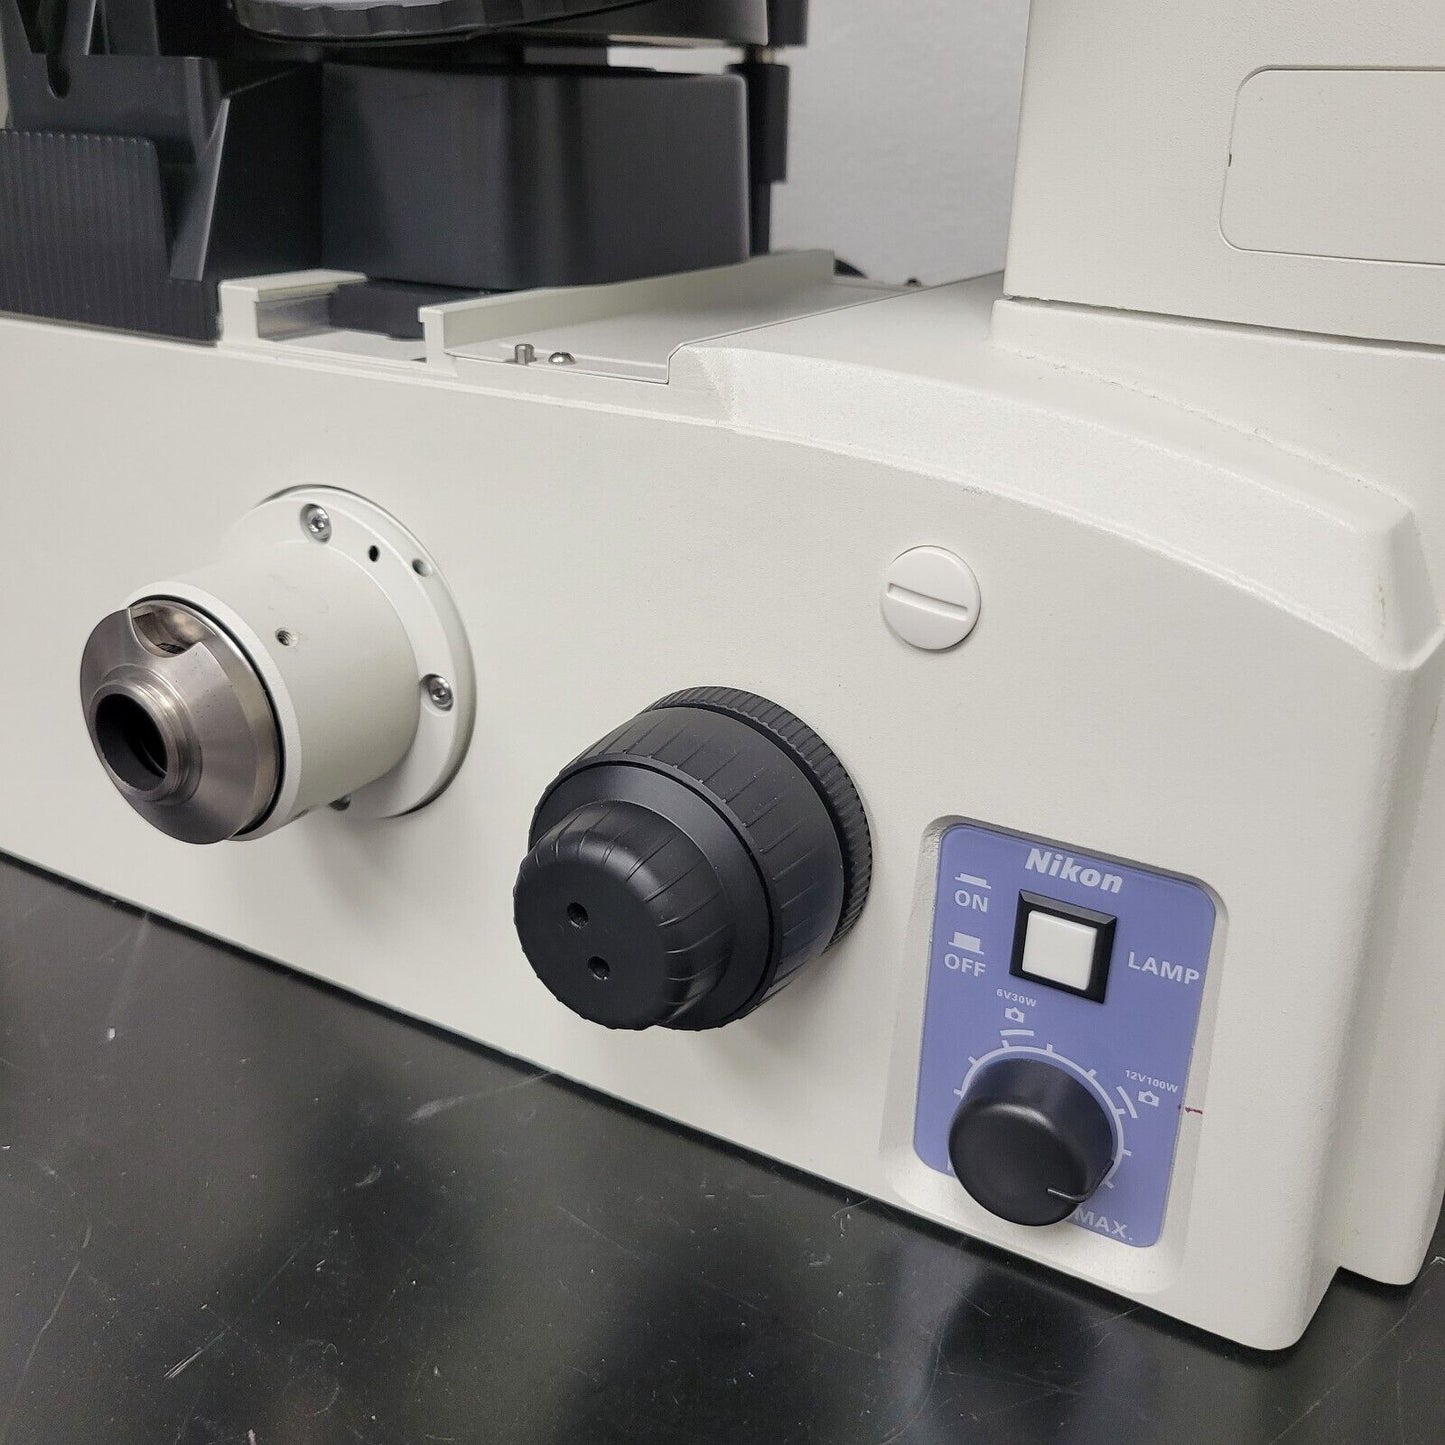 Nikon Inverted Microscope Eclipse TE2000-S with Hoffman Modulation Contrast - microscopemarketplace